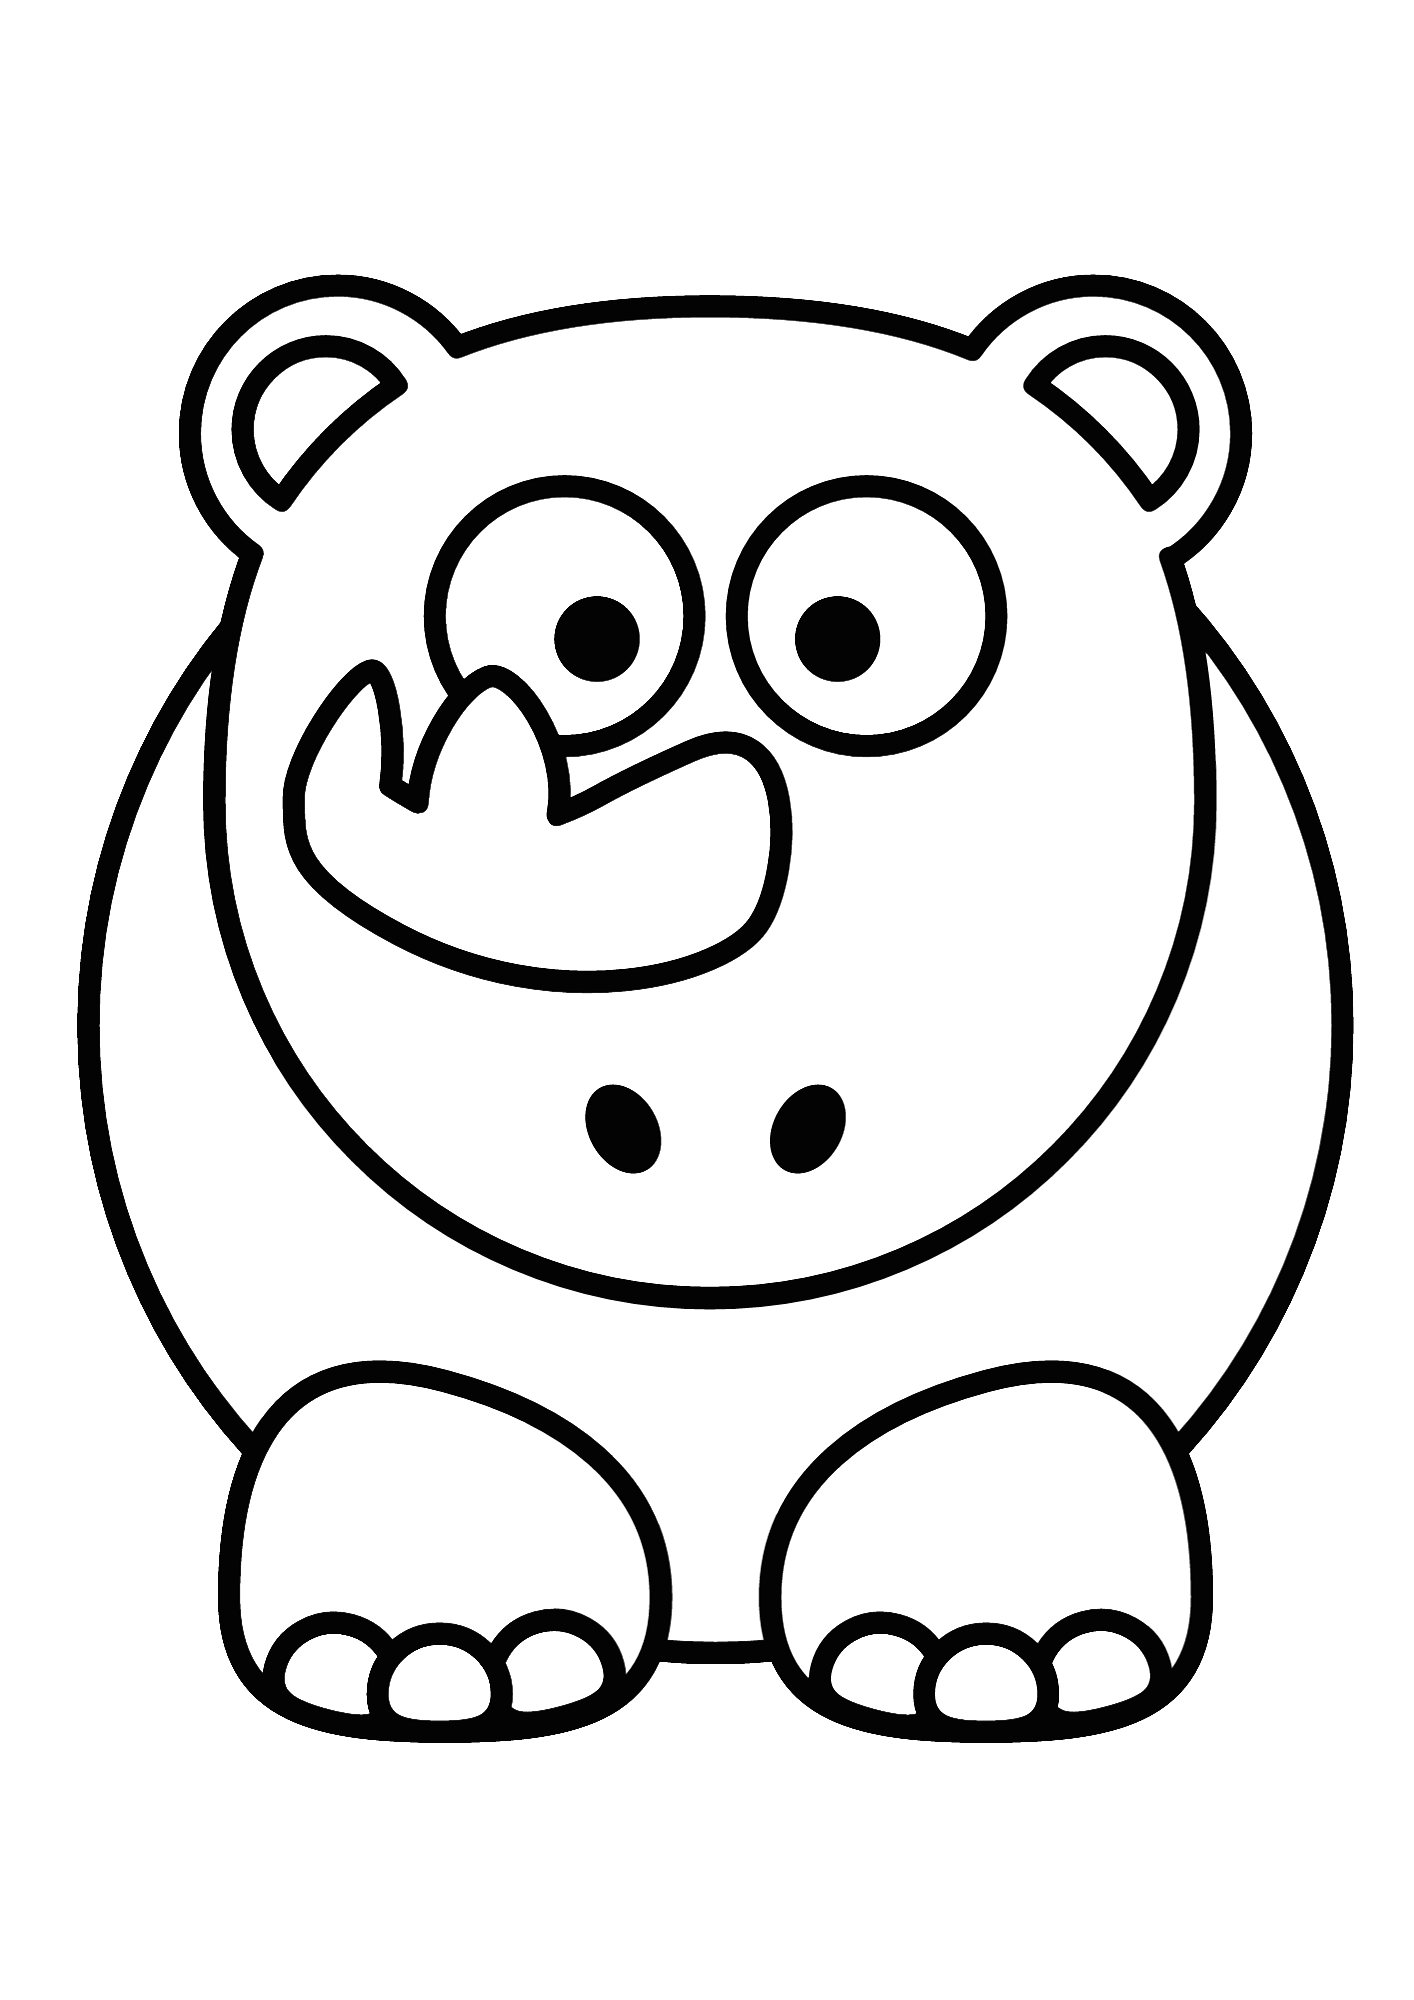 Rhino Image For Children Coloring Pages